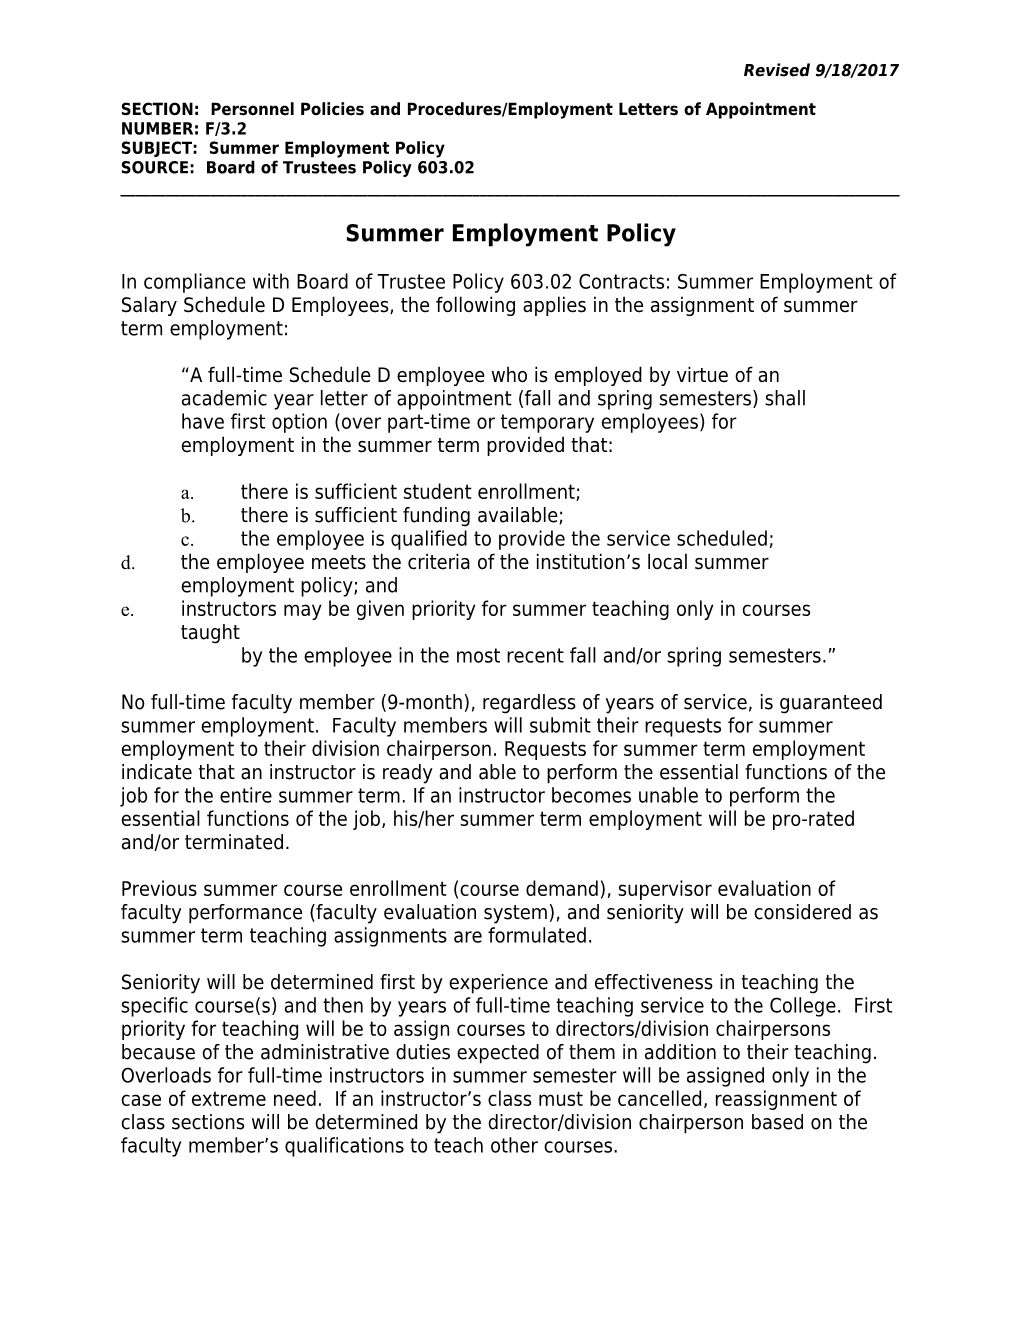 SECTION: Personnel Policies and Procedures/Employment Letters of Appointment NUMBER: F/3.2